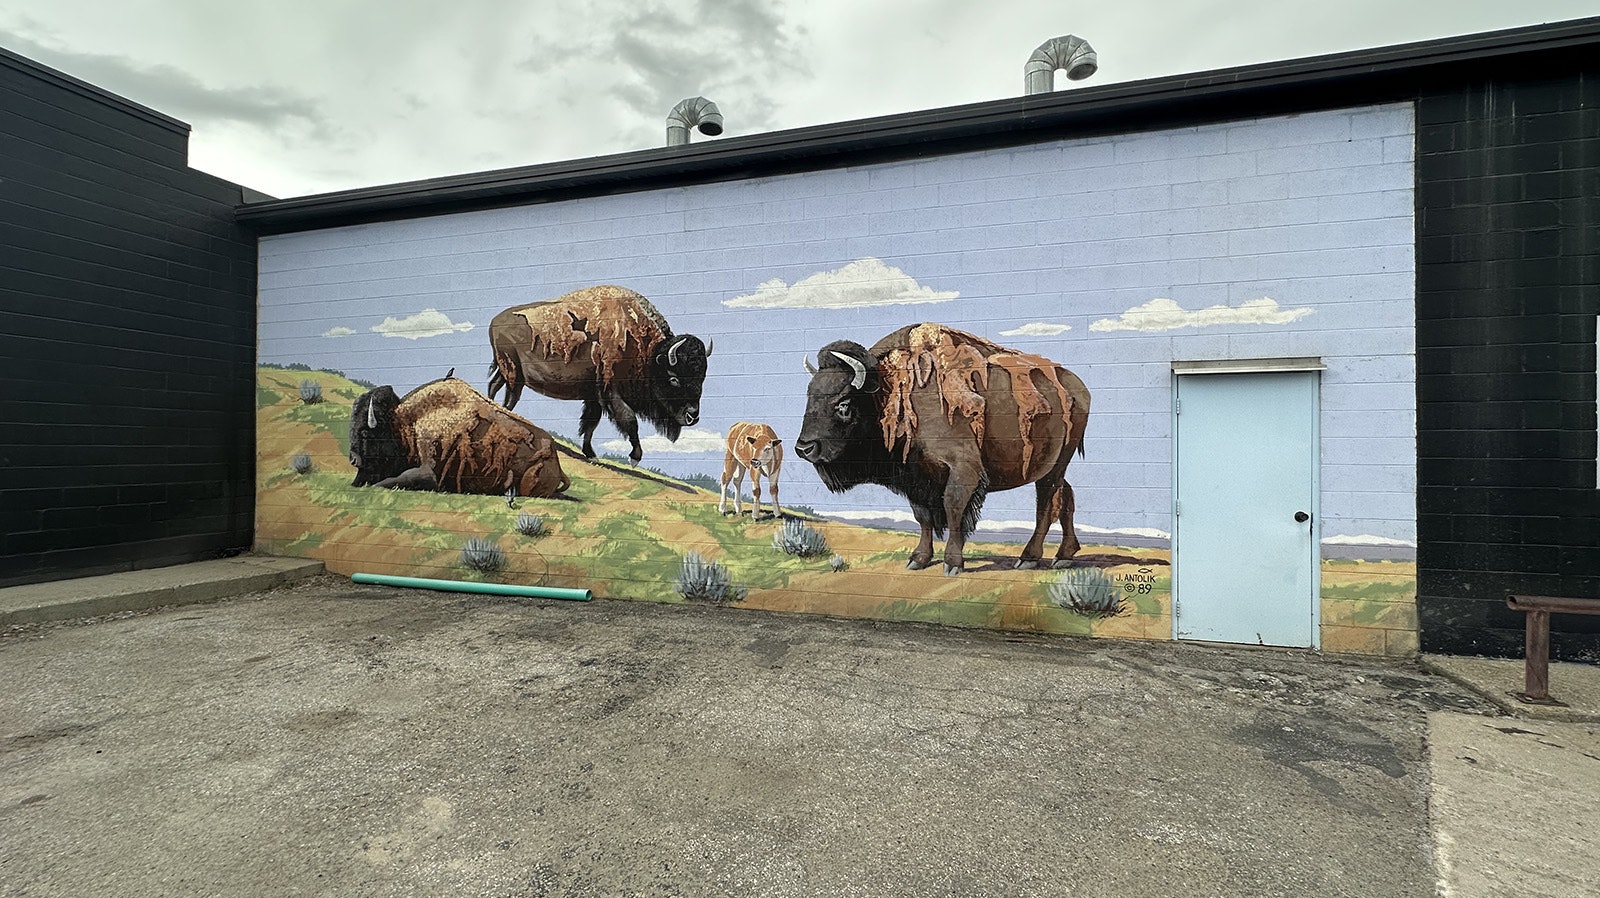 Murals, like those found in downtown Lander, reflect Wyoming's Western culture while highlighting local artists.